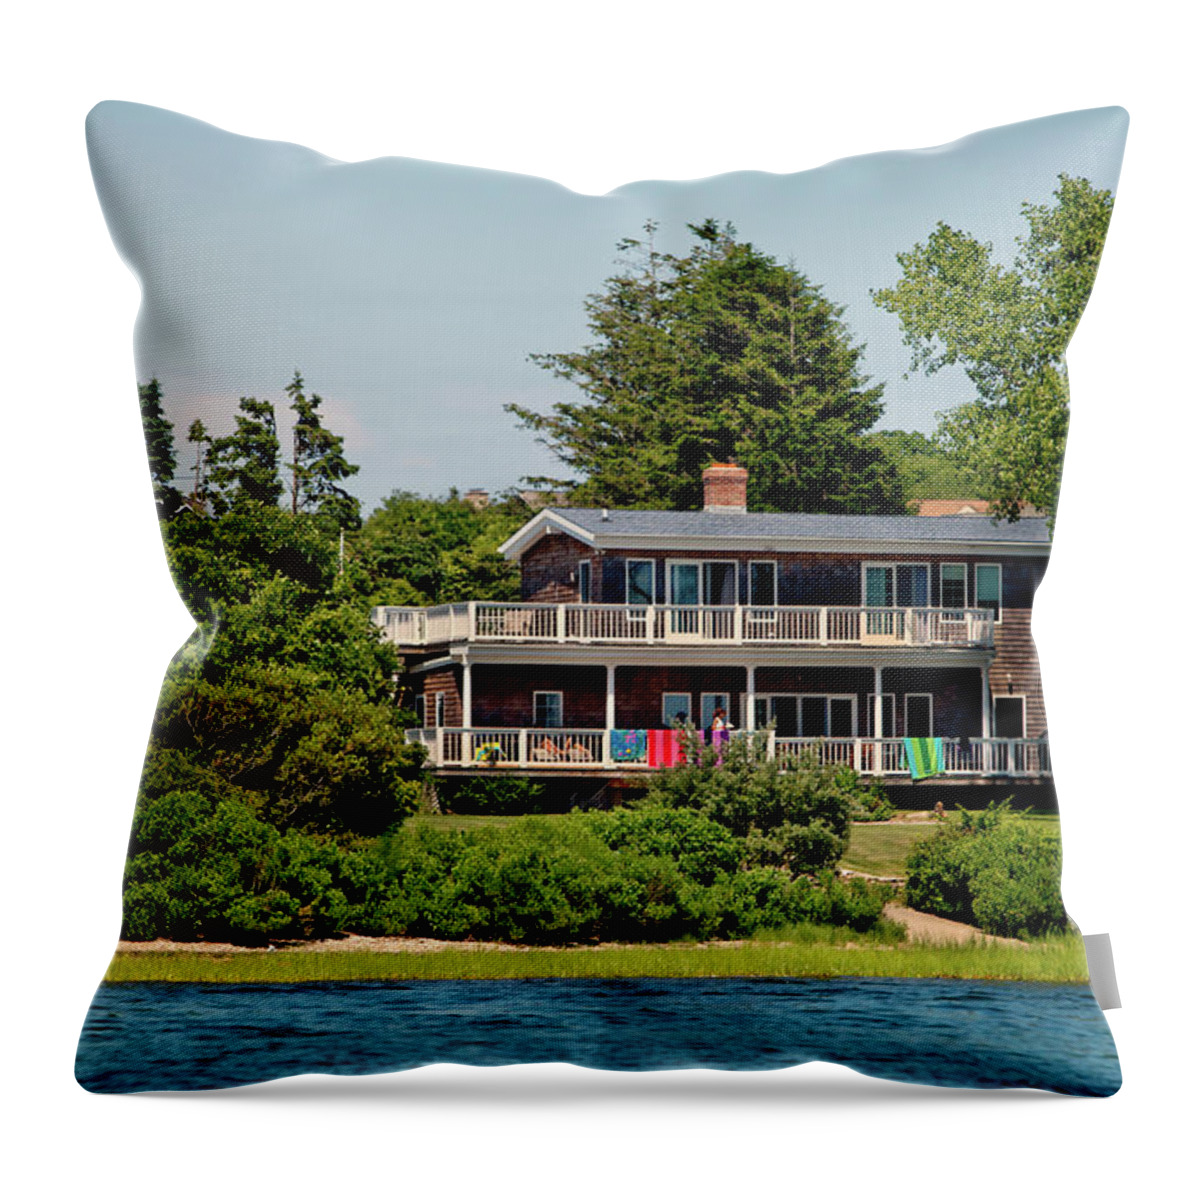 Montauk Throw Pillow featuring the photograph Montauk Beach Towels by Art Block Collections